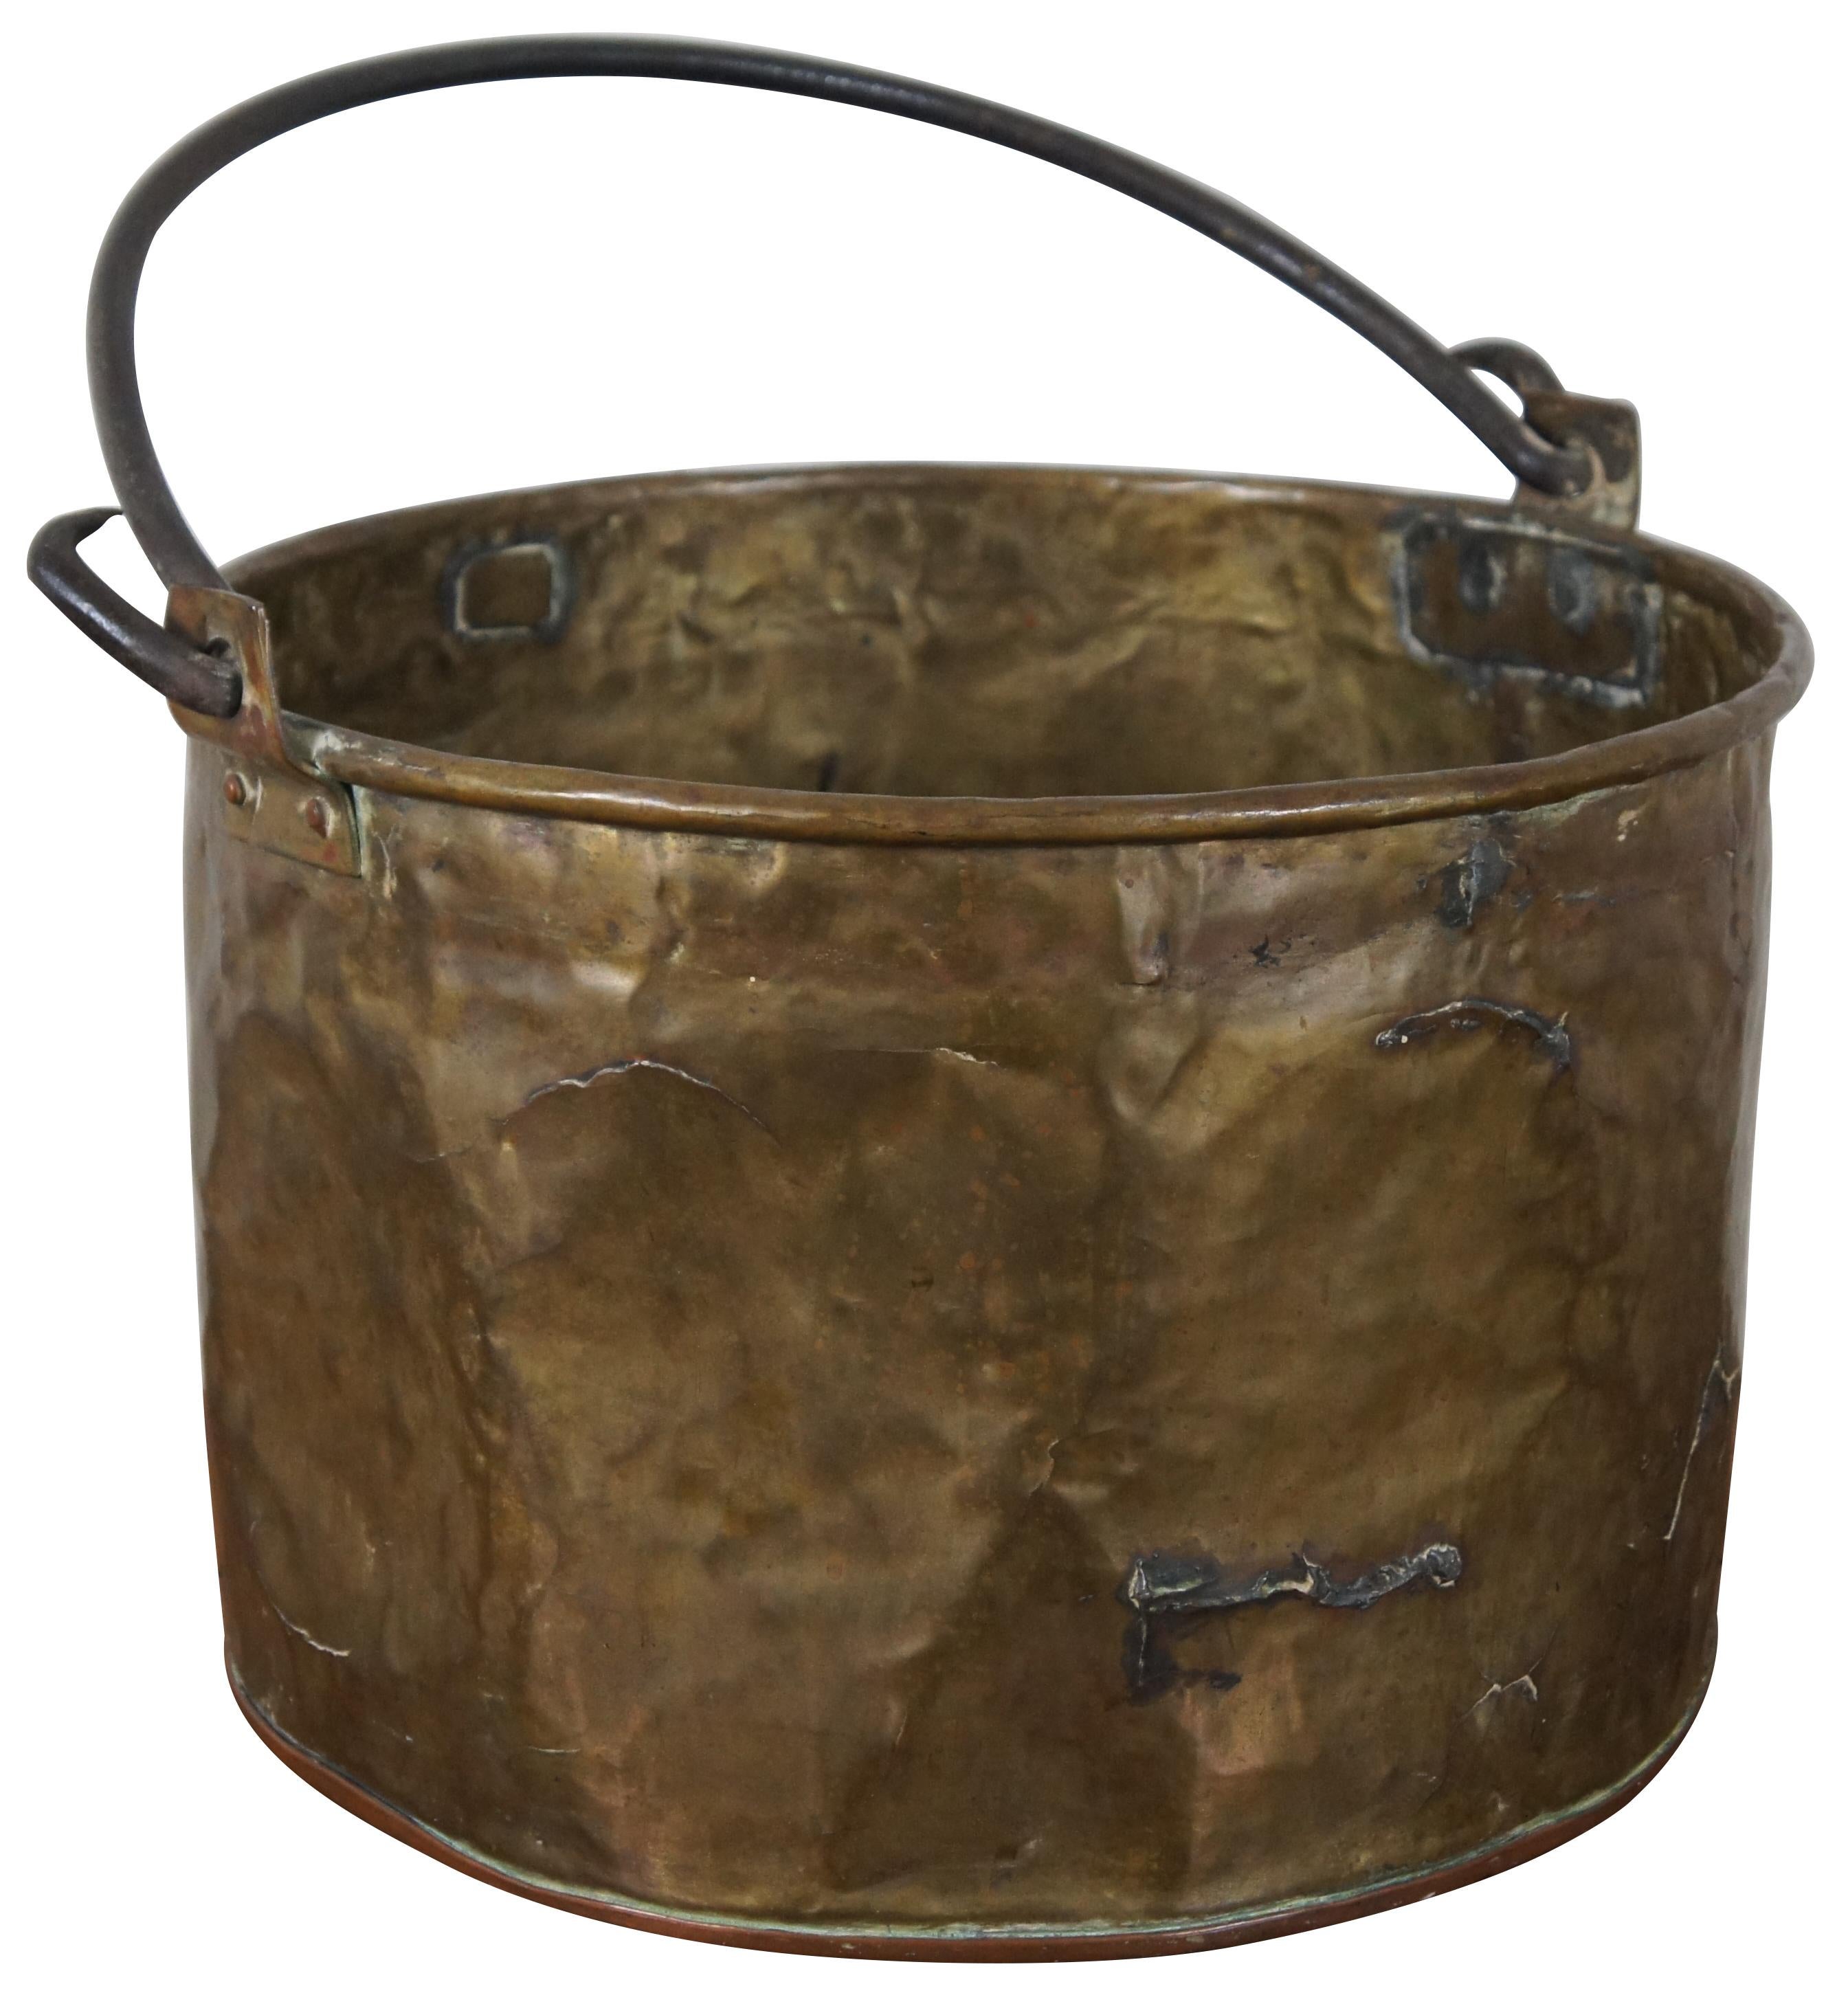 Large antique brass cauldron or stock pot with copper bottom and forged iron handle. Measure: 17”.